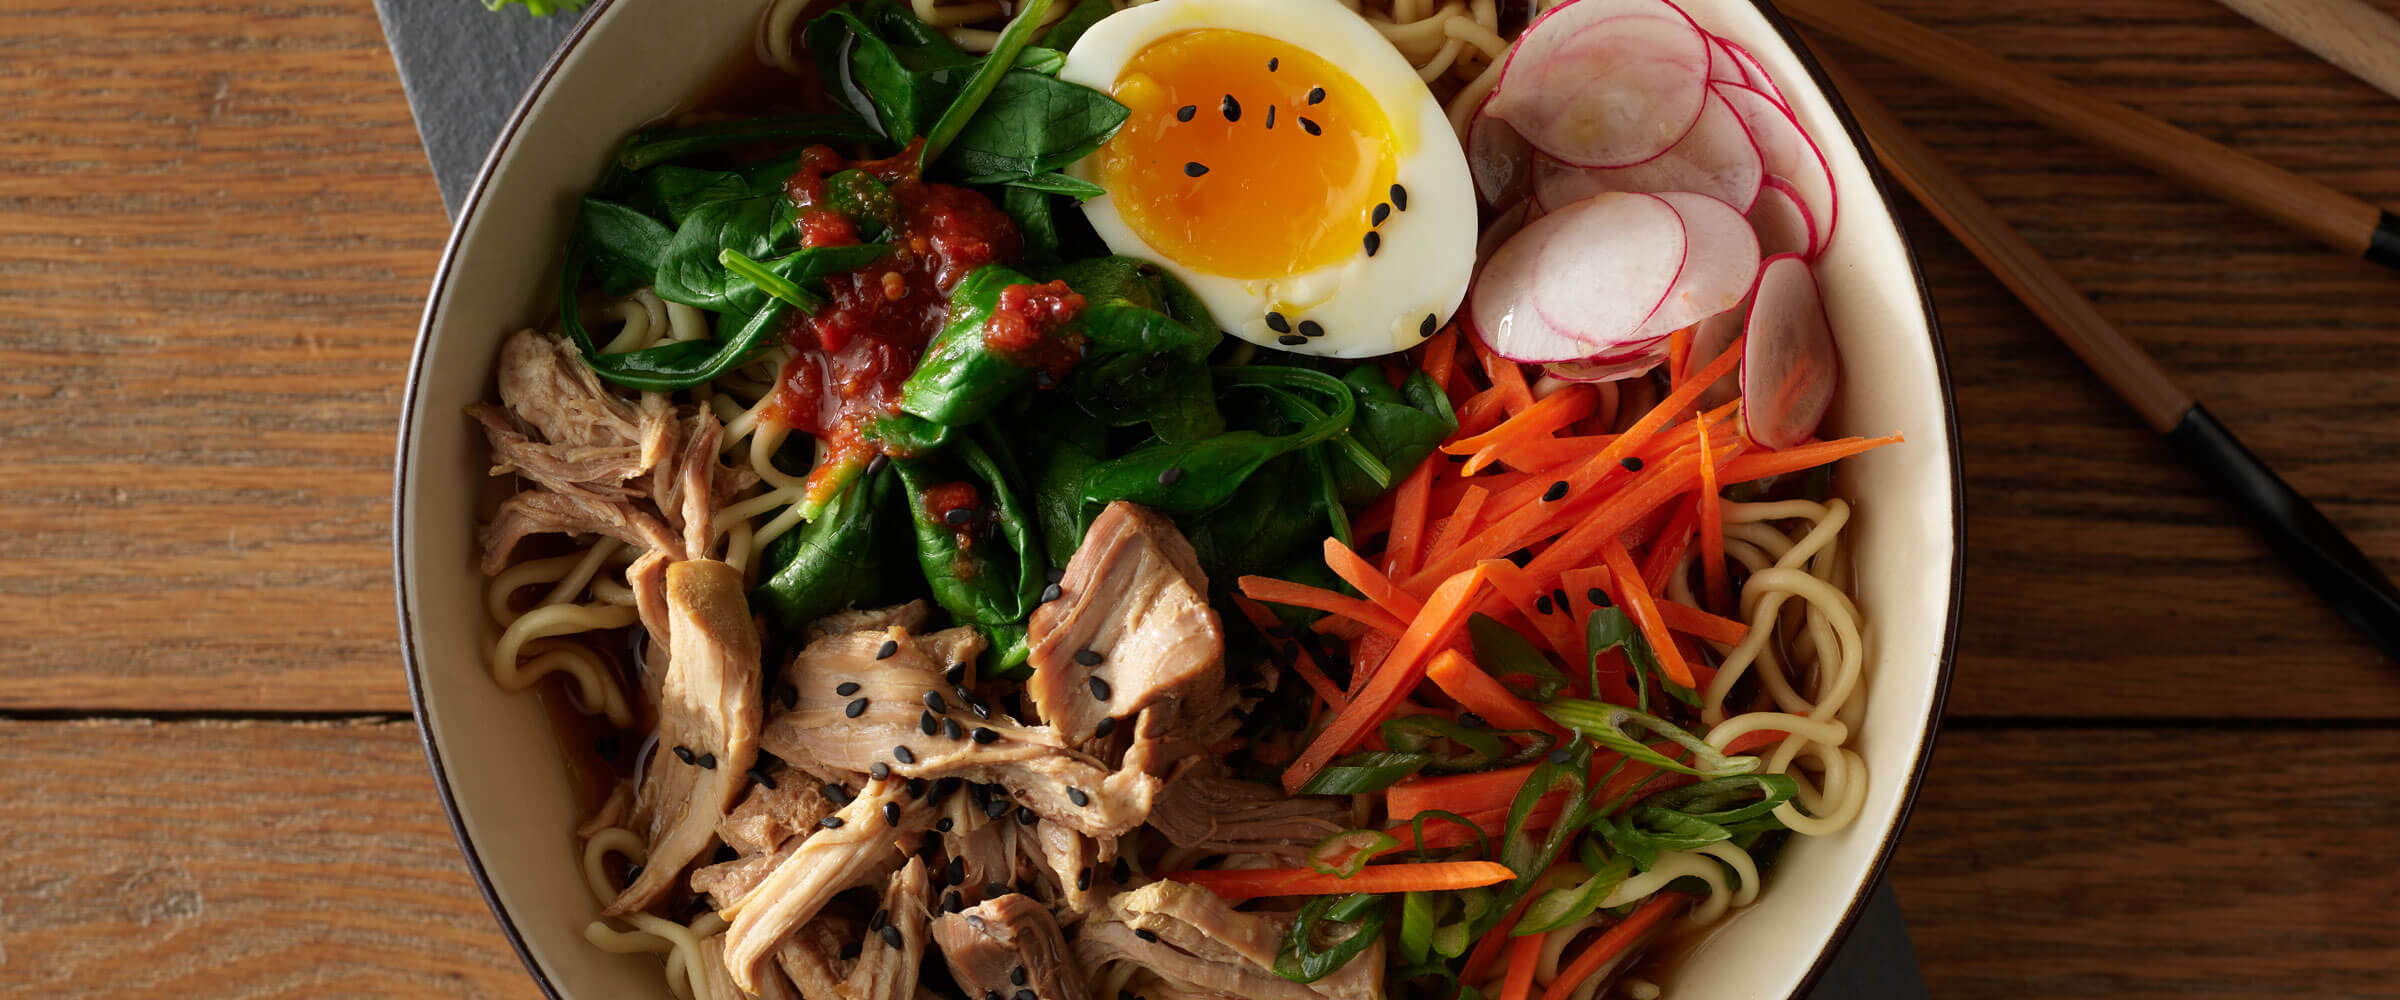 Pork Ramen Noodle Bowl topped with egg and vegetables